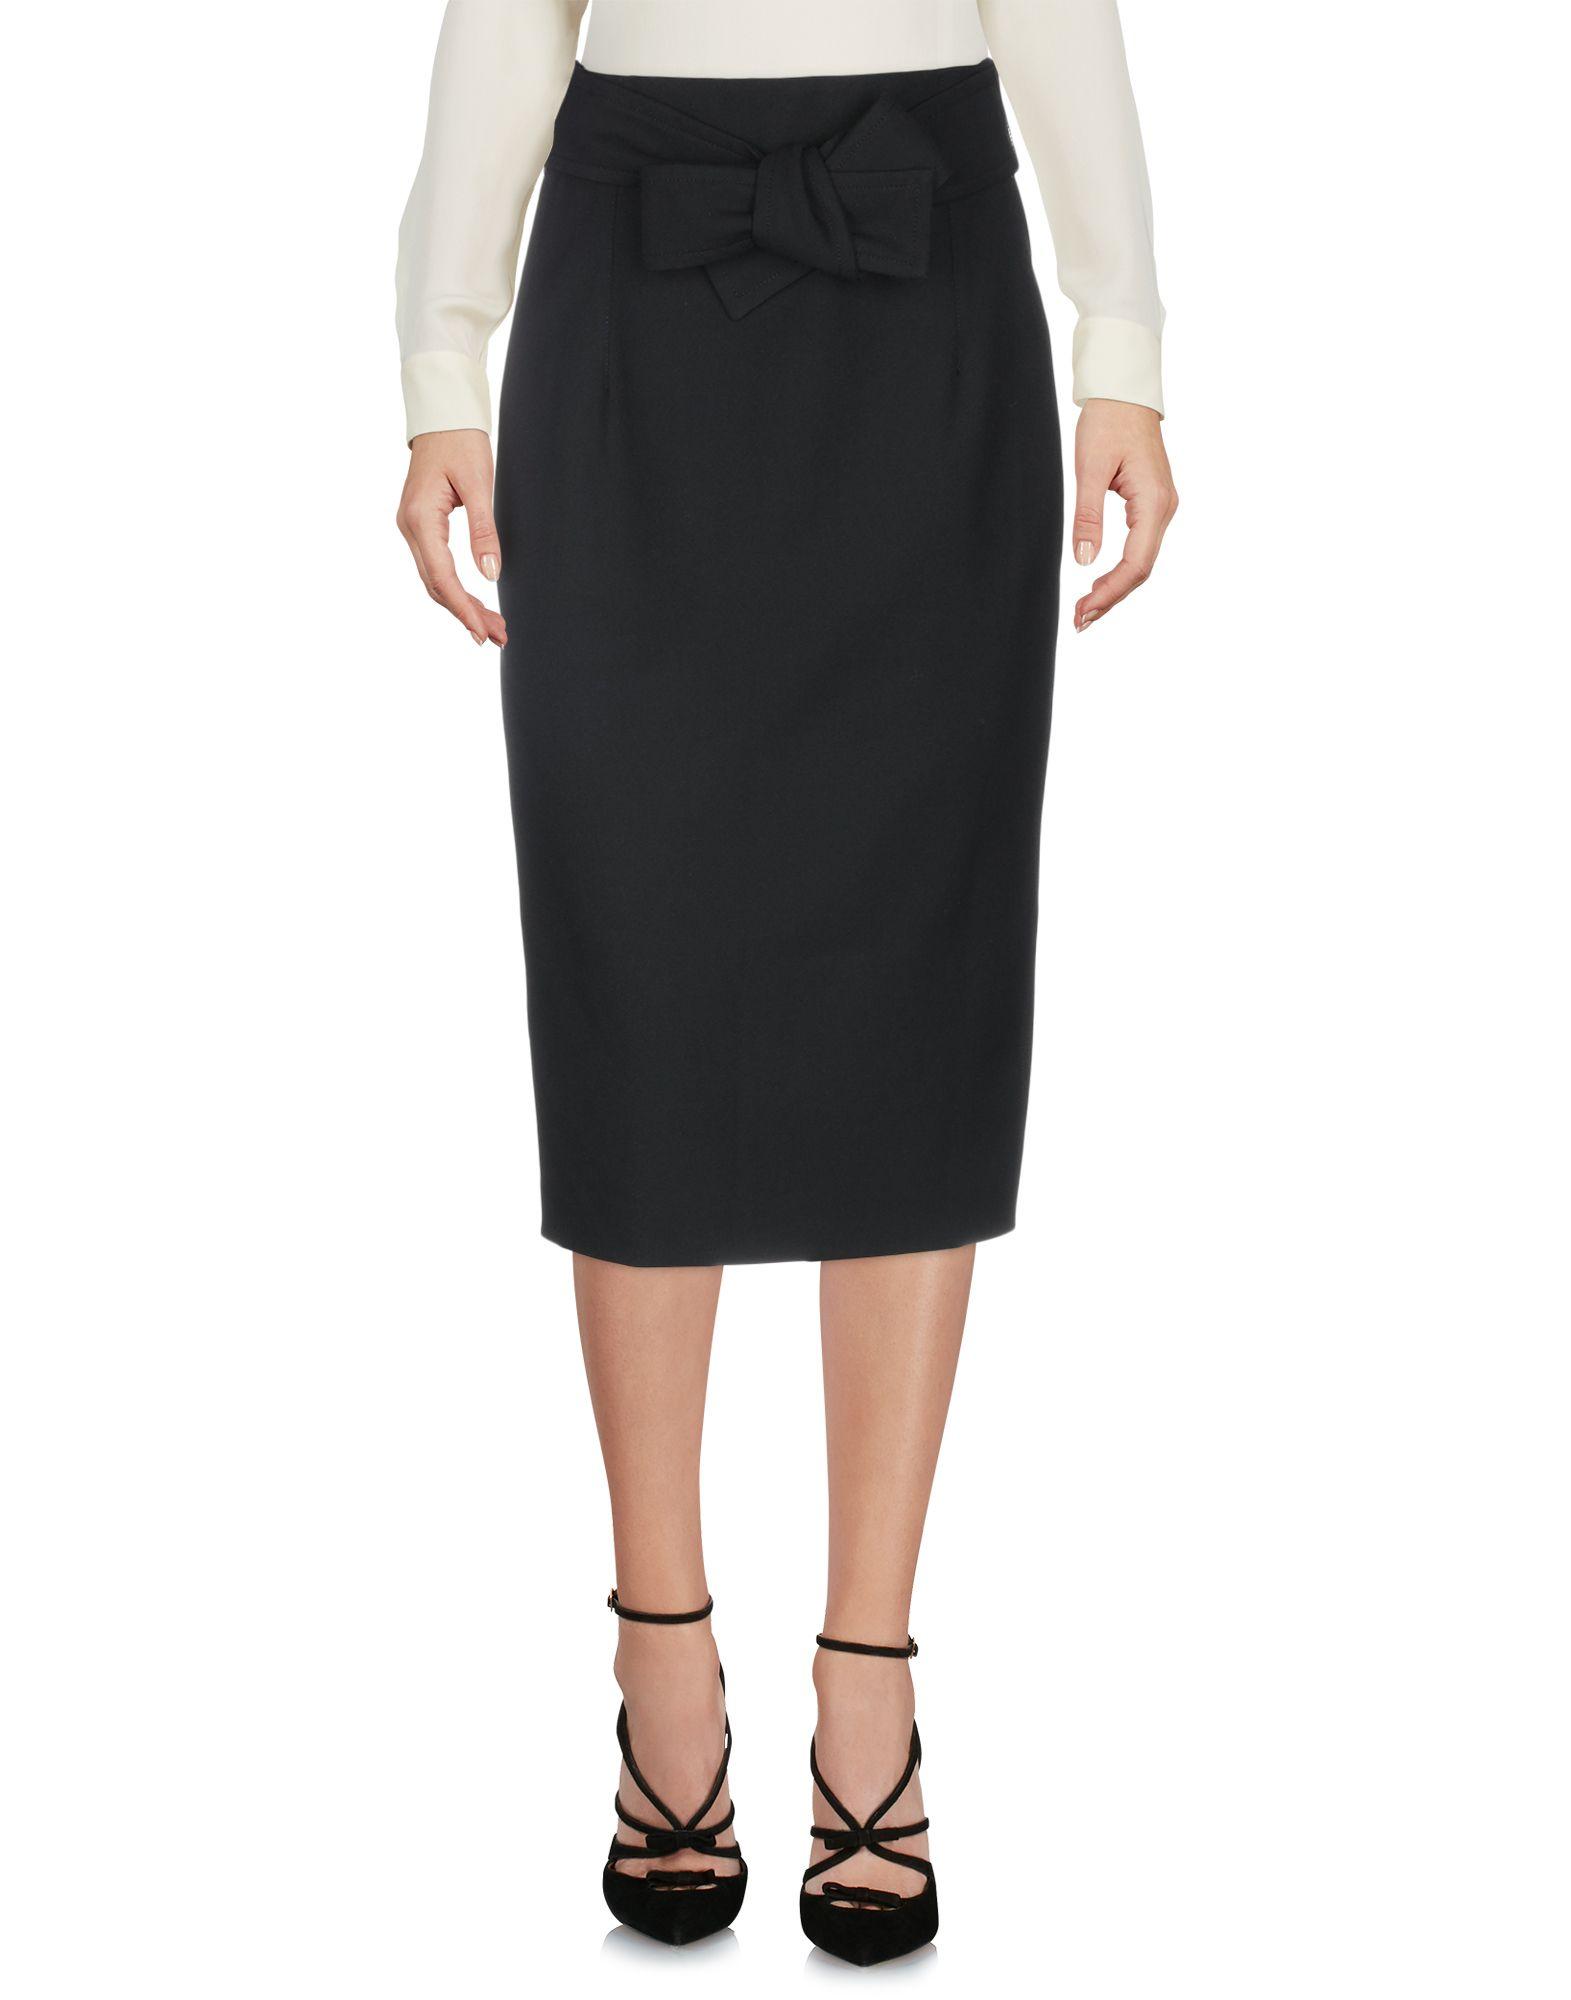 Marella Synthetic 3/4 Length Skirt in Black - Lyst